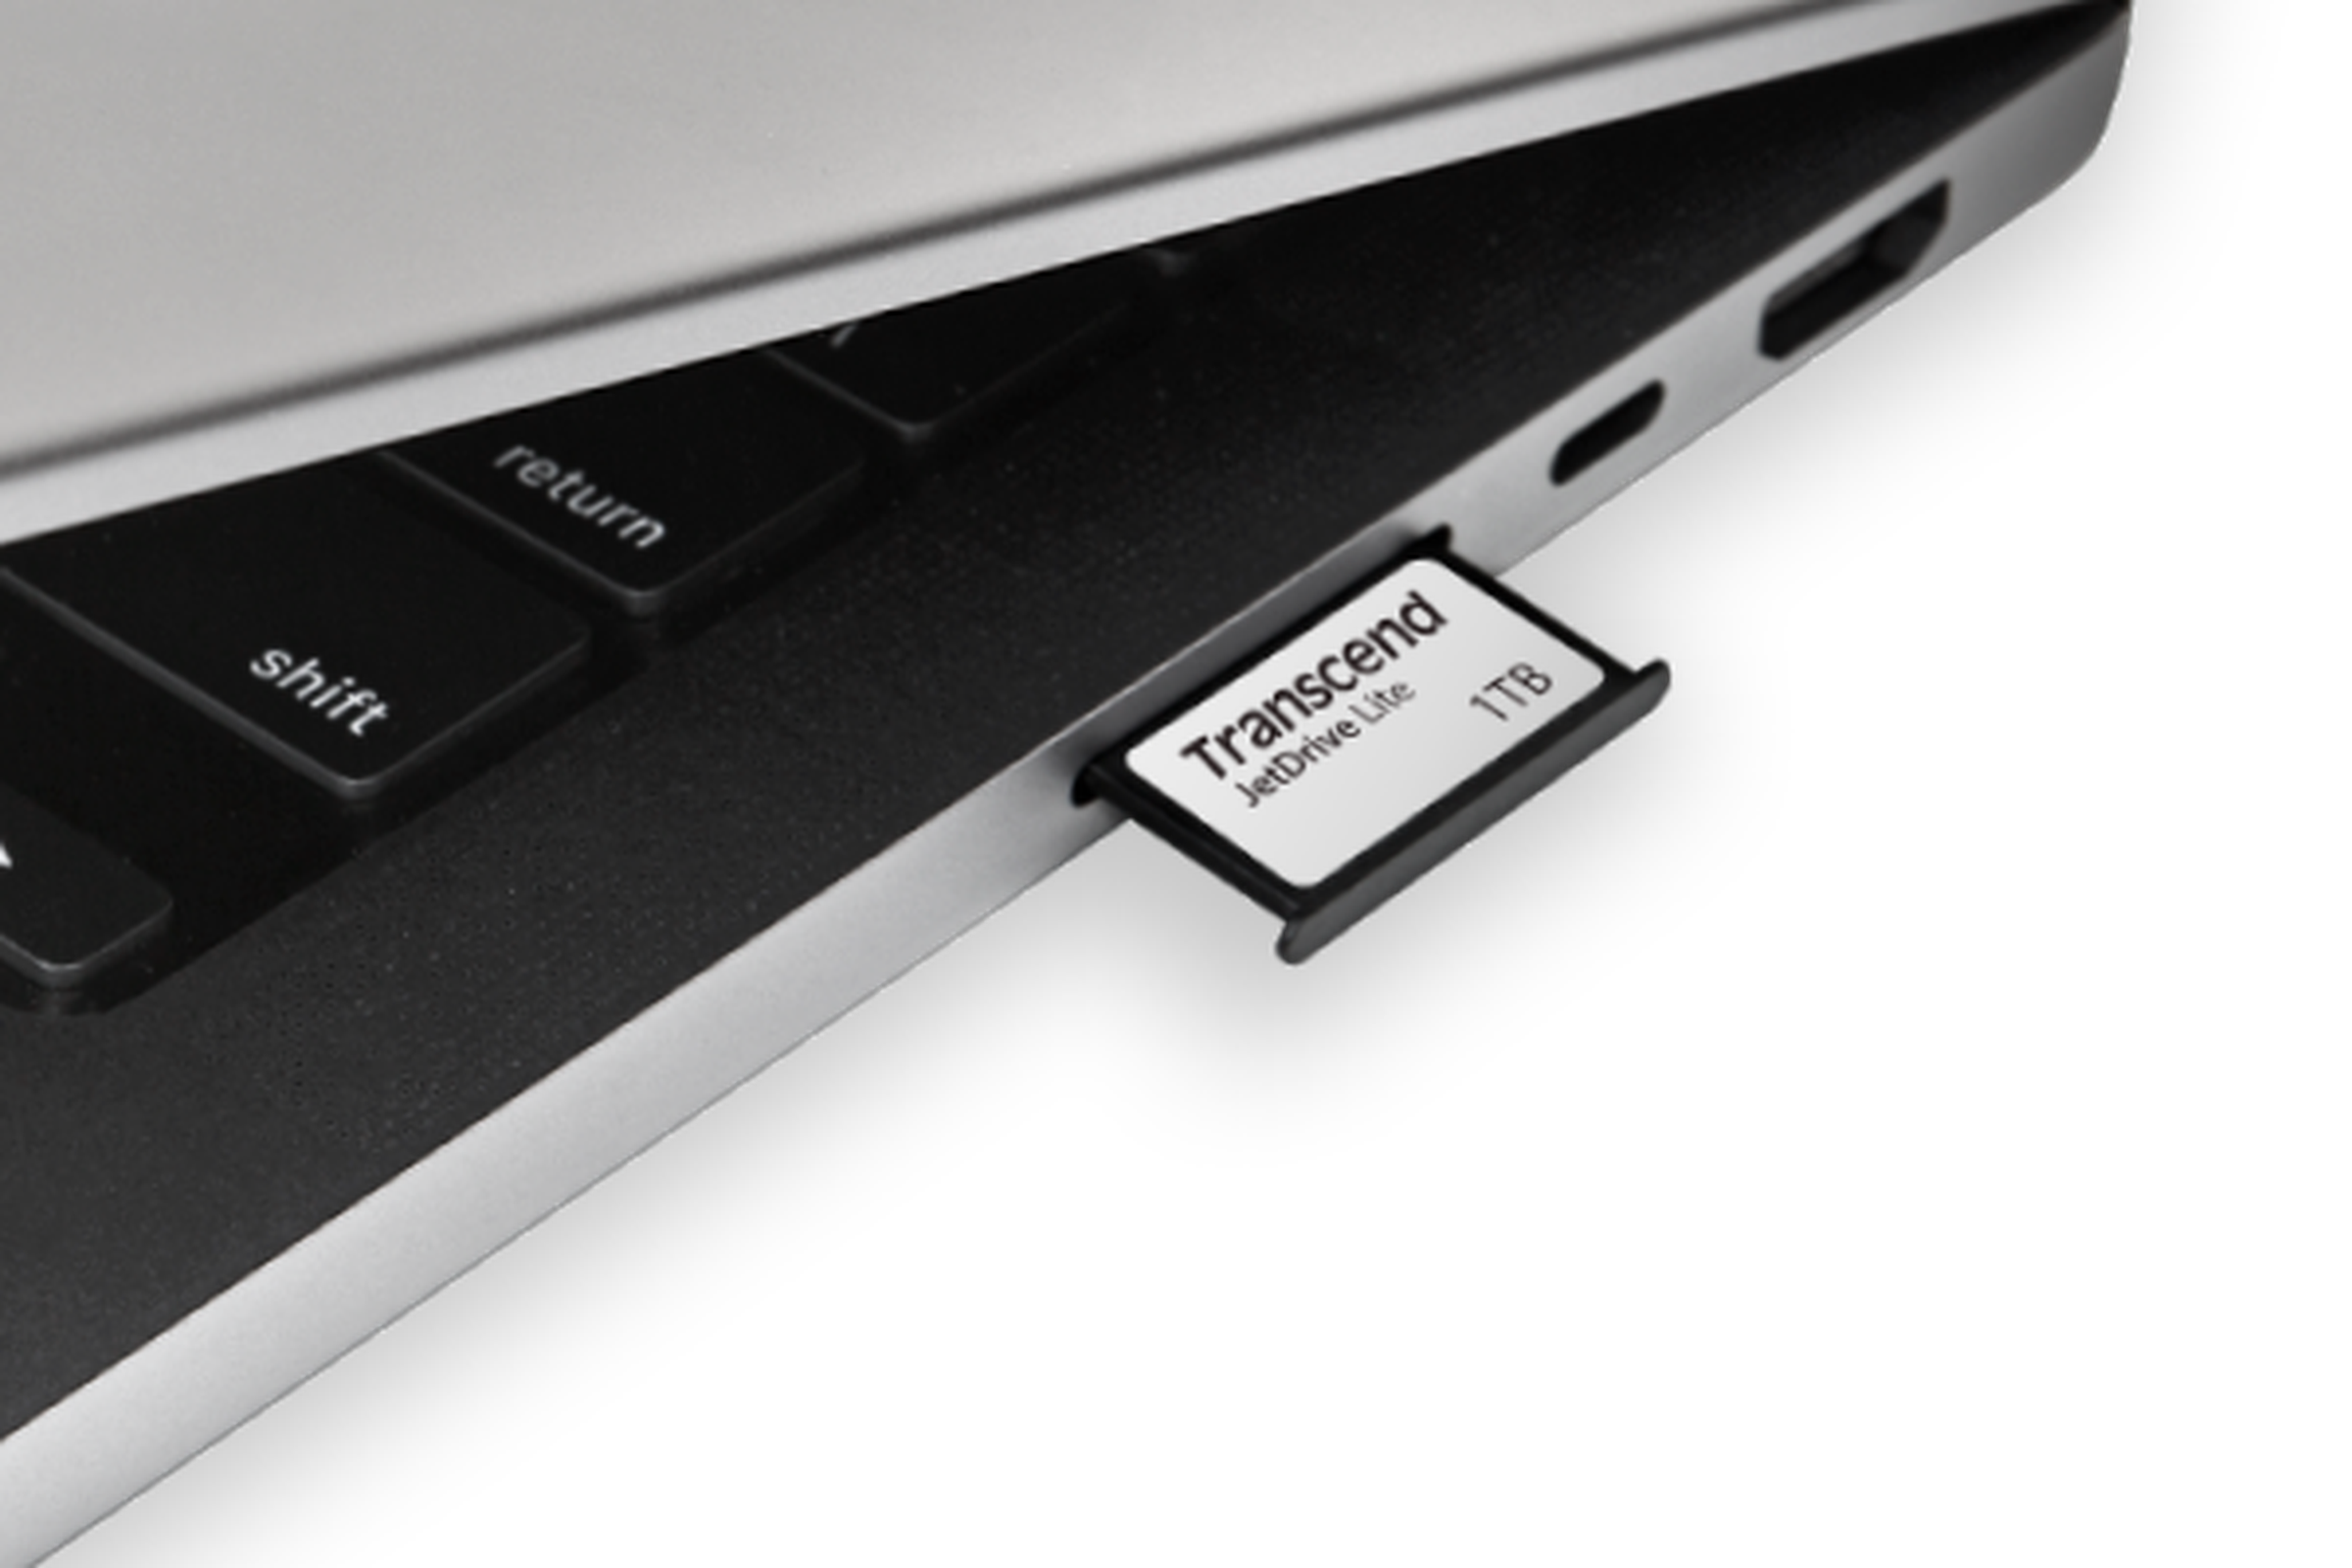 The JetDrive Lite 330 is partially inserted into the SD slot on a MacBook Pro.